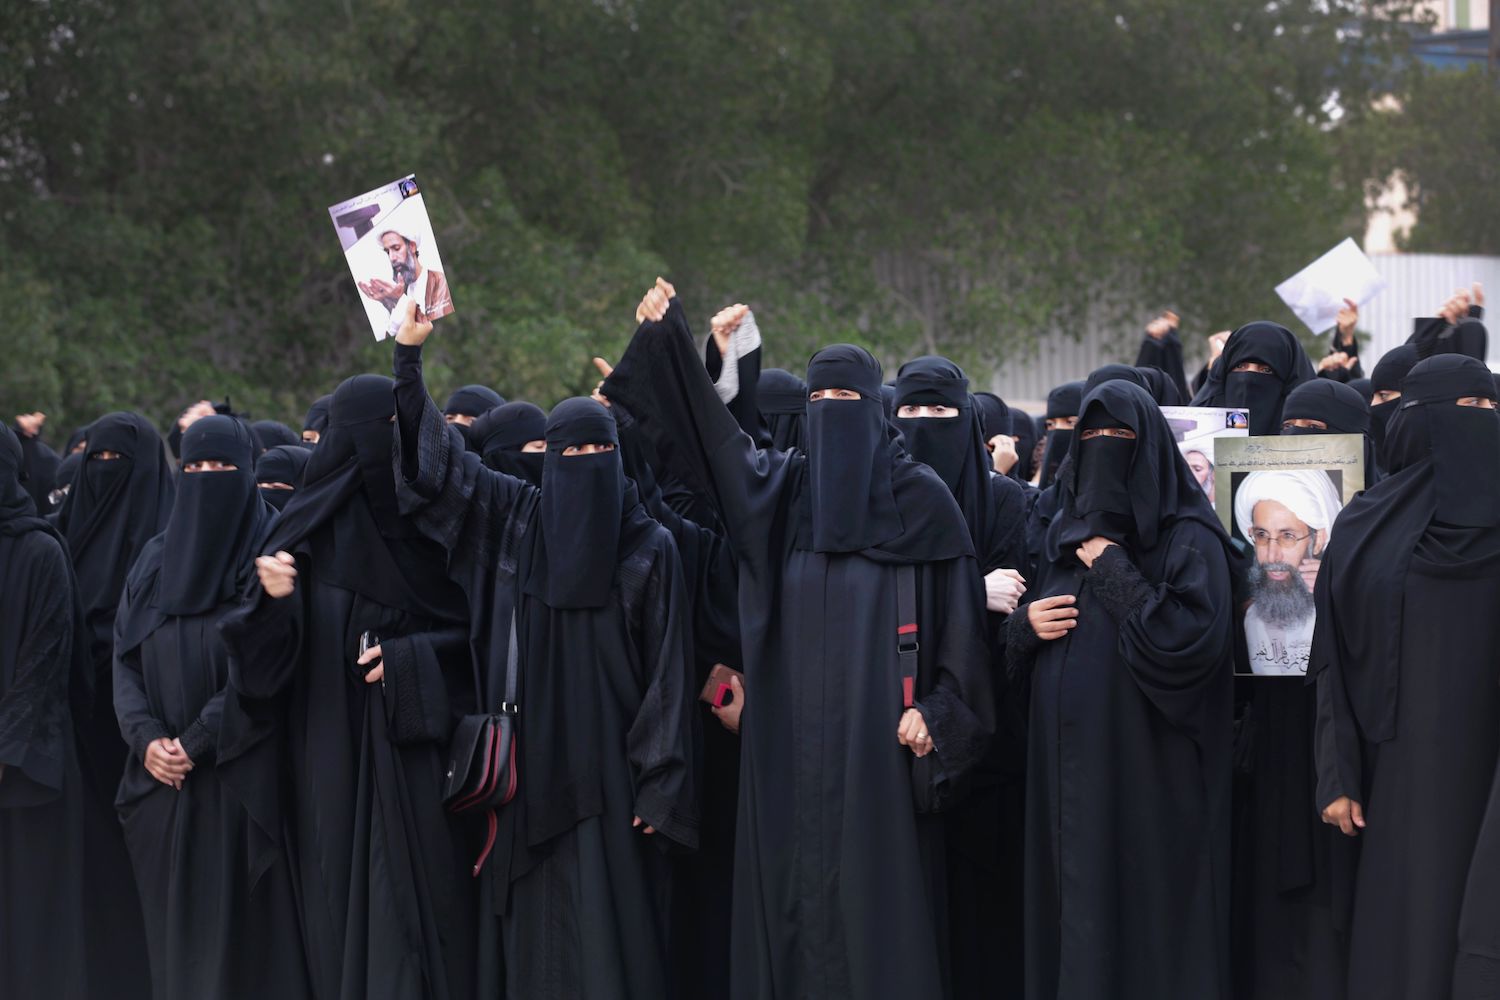 Movie Theaters and Women Driving Won’t Placate Saudi Shiites